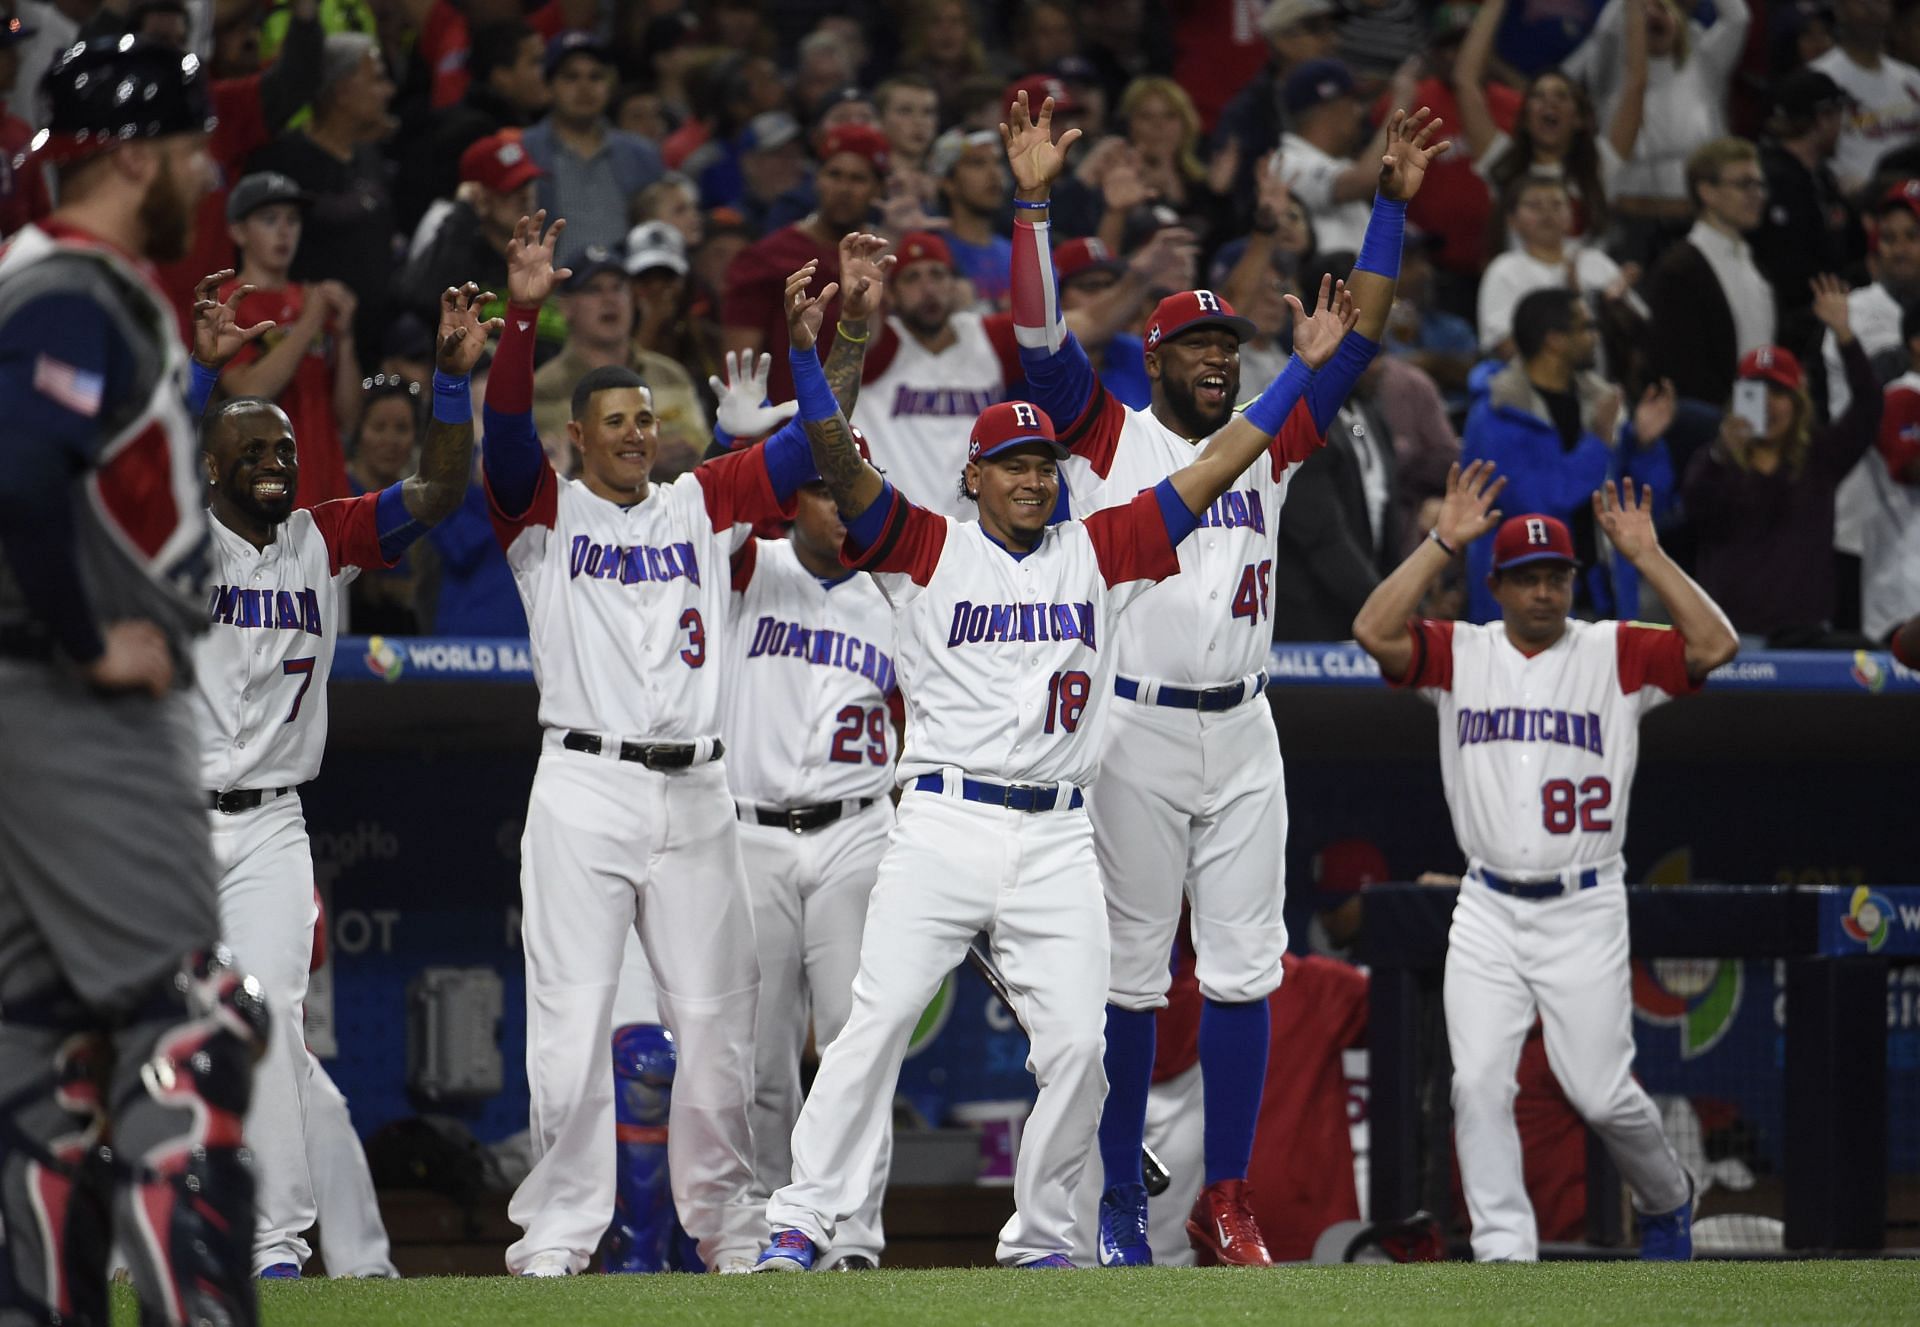 Message to Dominican team at World Baseball Classic: Check egos at